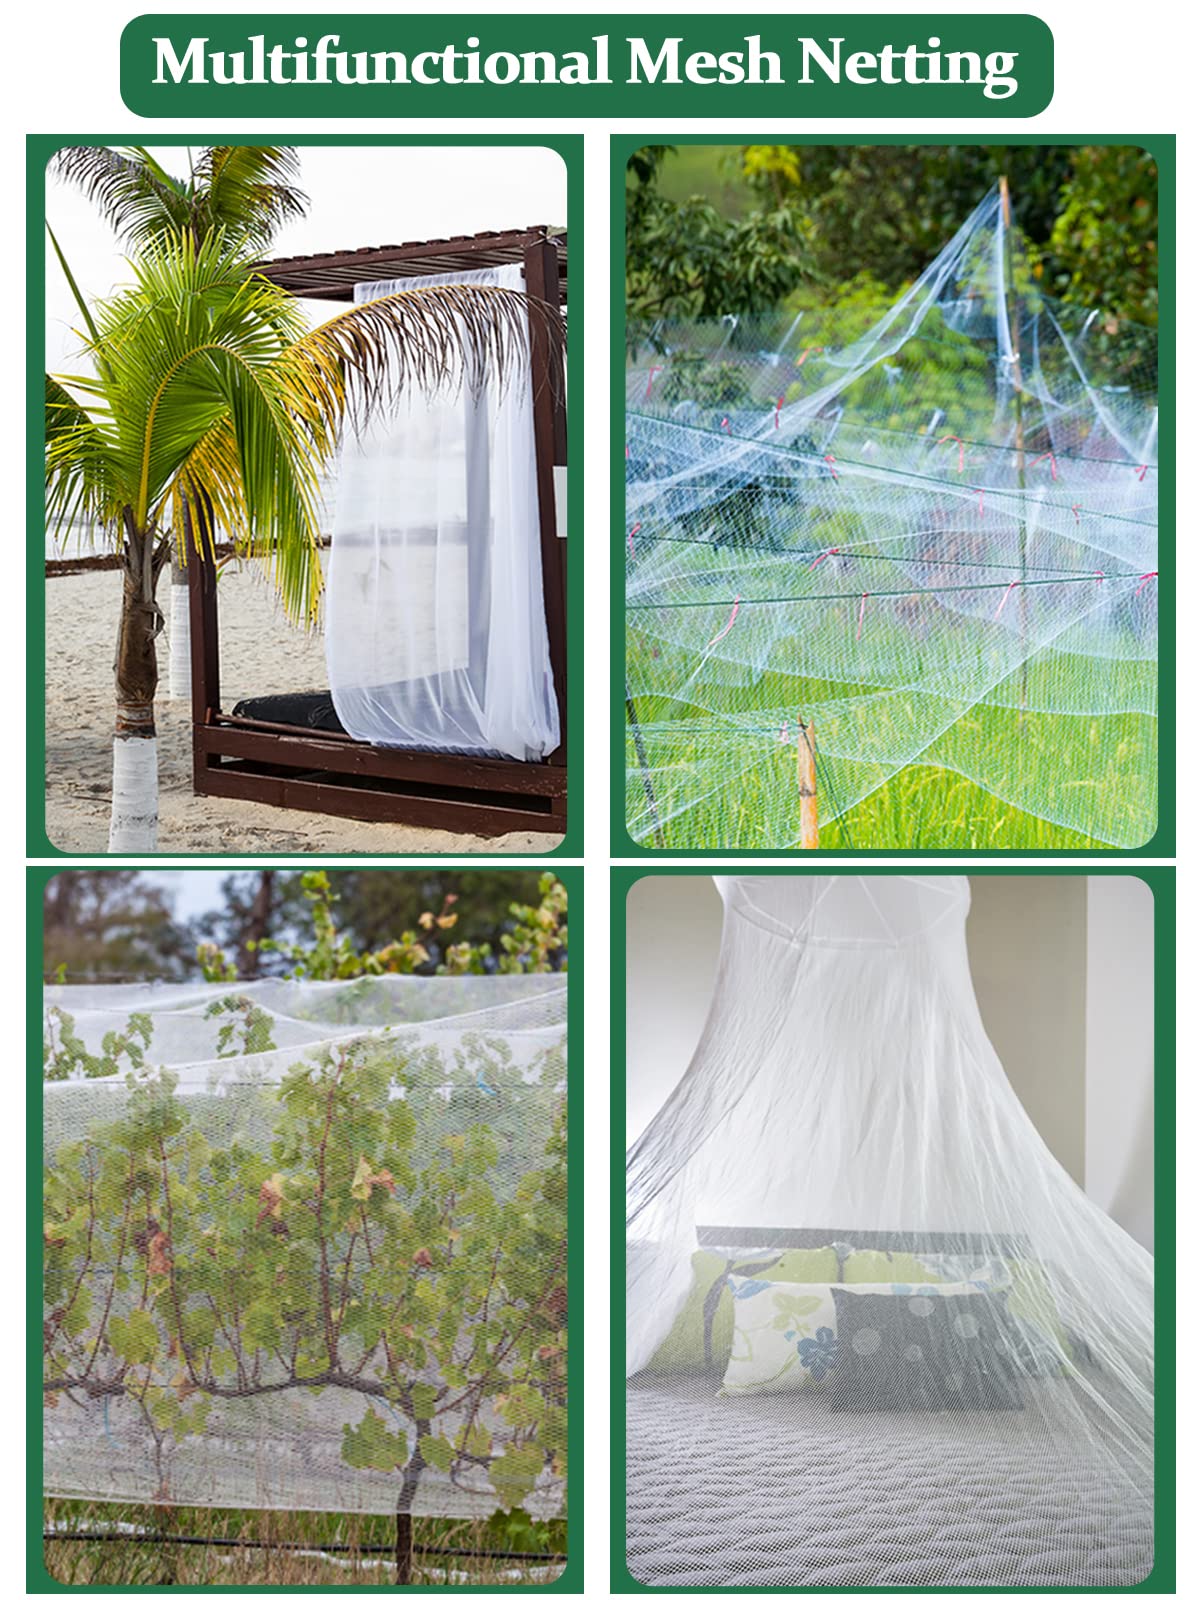 Garden Mosquito Netting for Patio, 10 ft x 12 ft Bird Bug Insect Netting Pest Barrier for Fruit Trees, Greenhouse, Large Plant Row Cover Screen for Vegetables